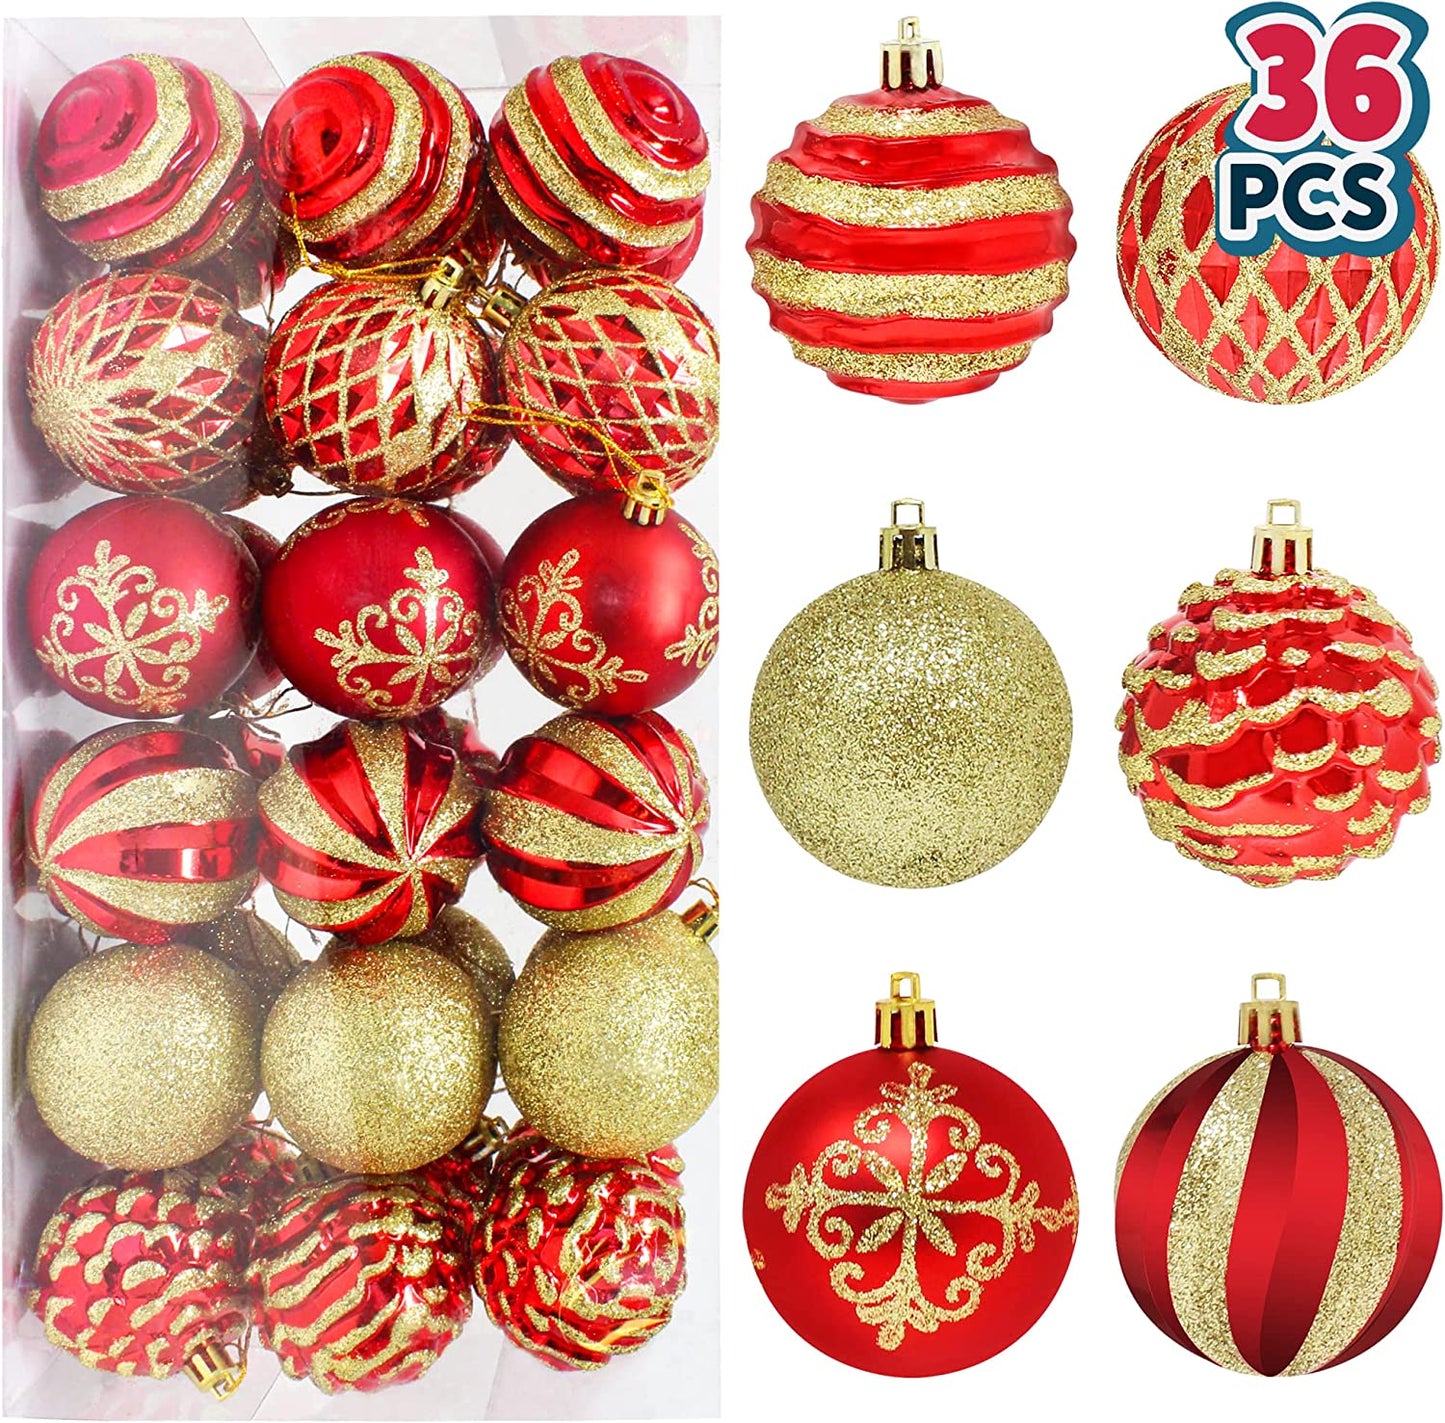 36 pieces Red and Gold Christmas Ornaments